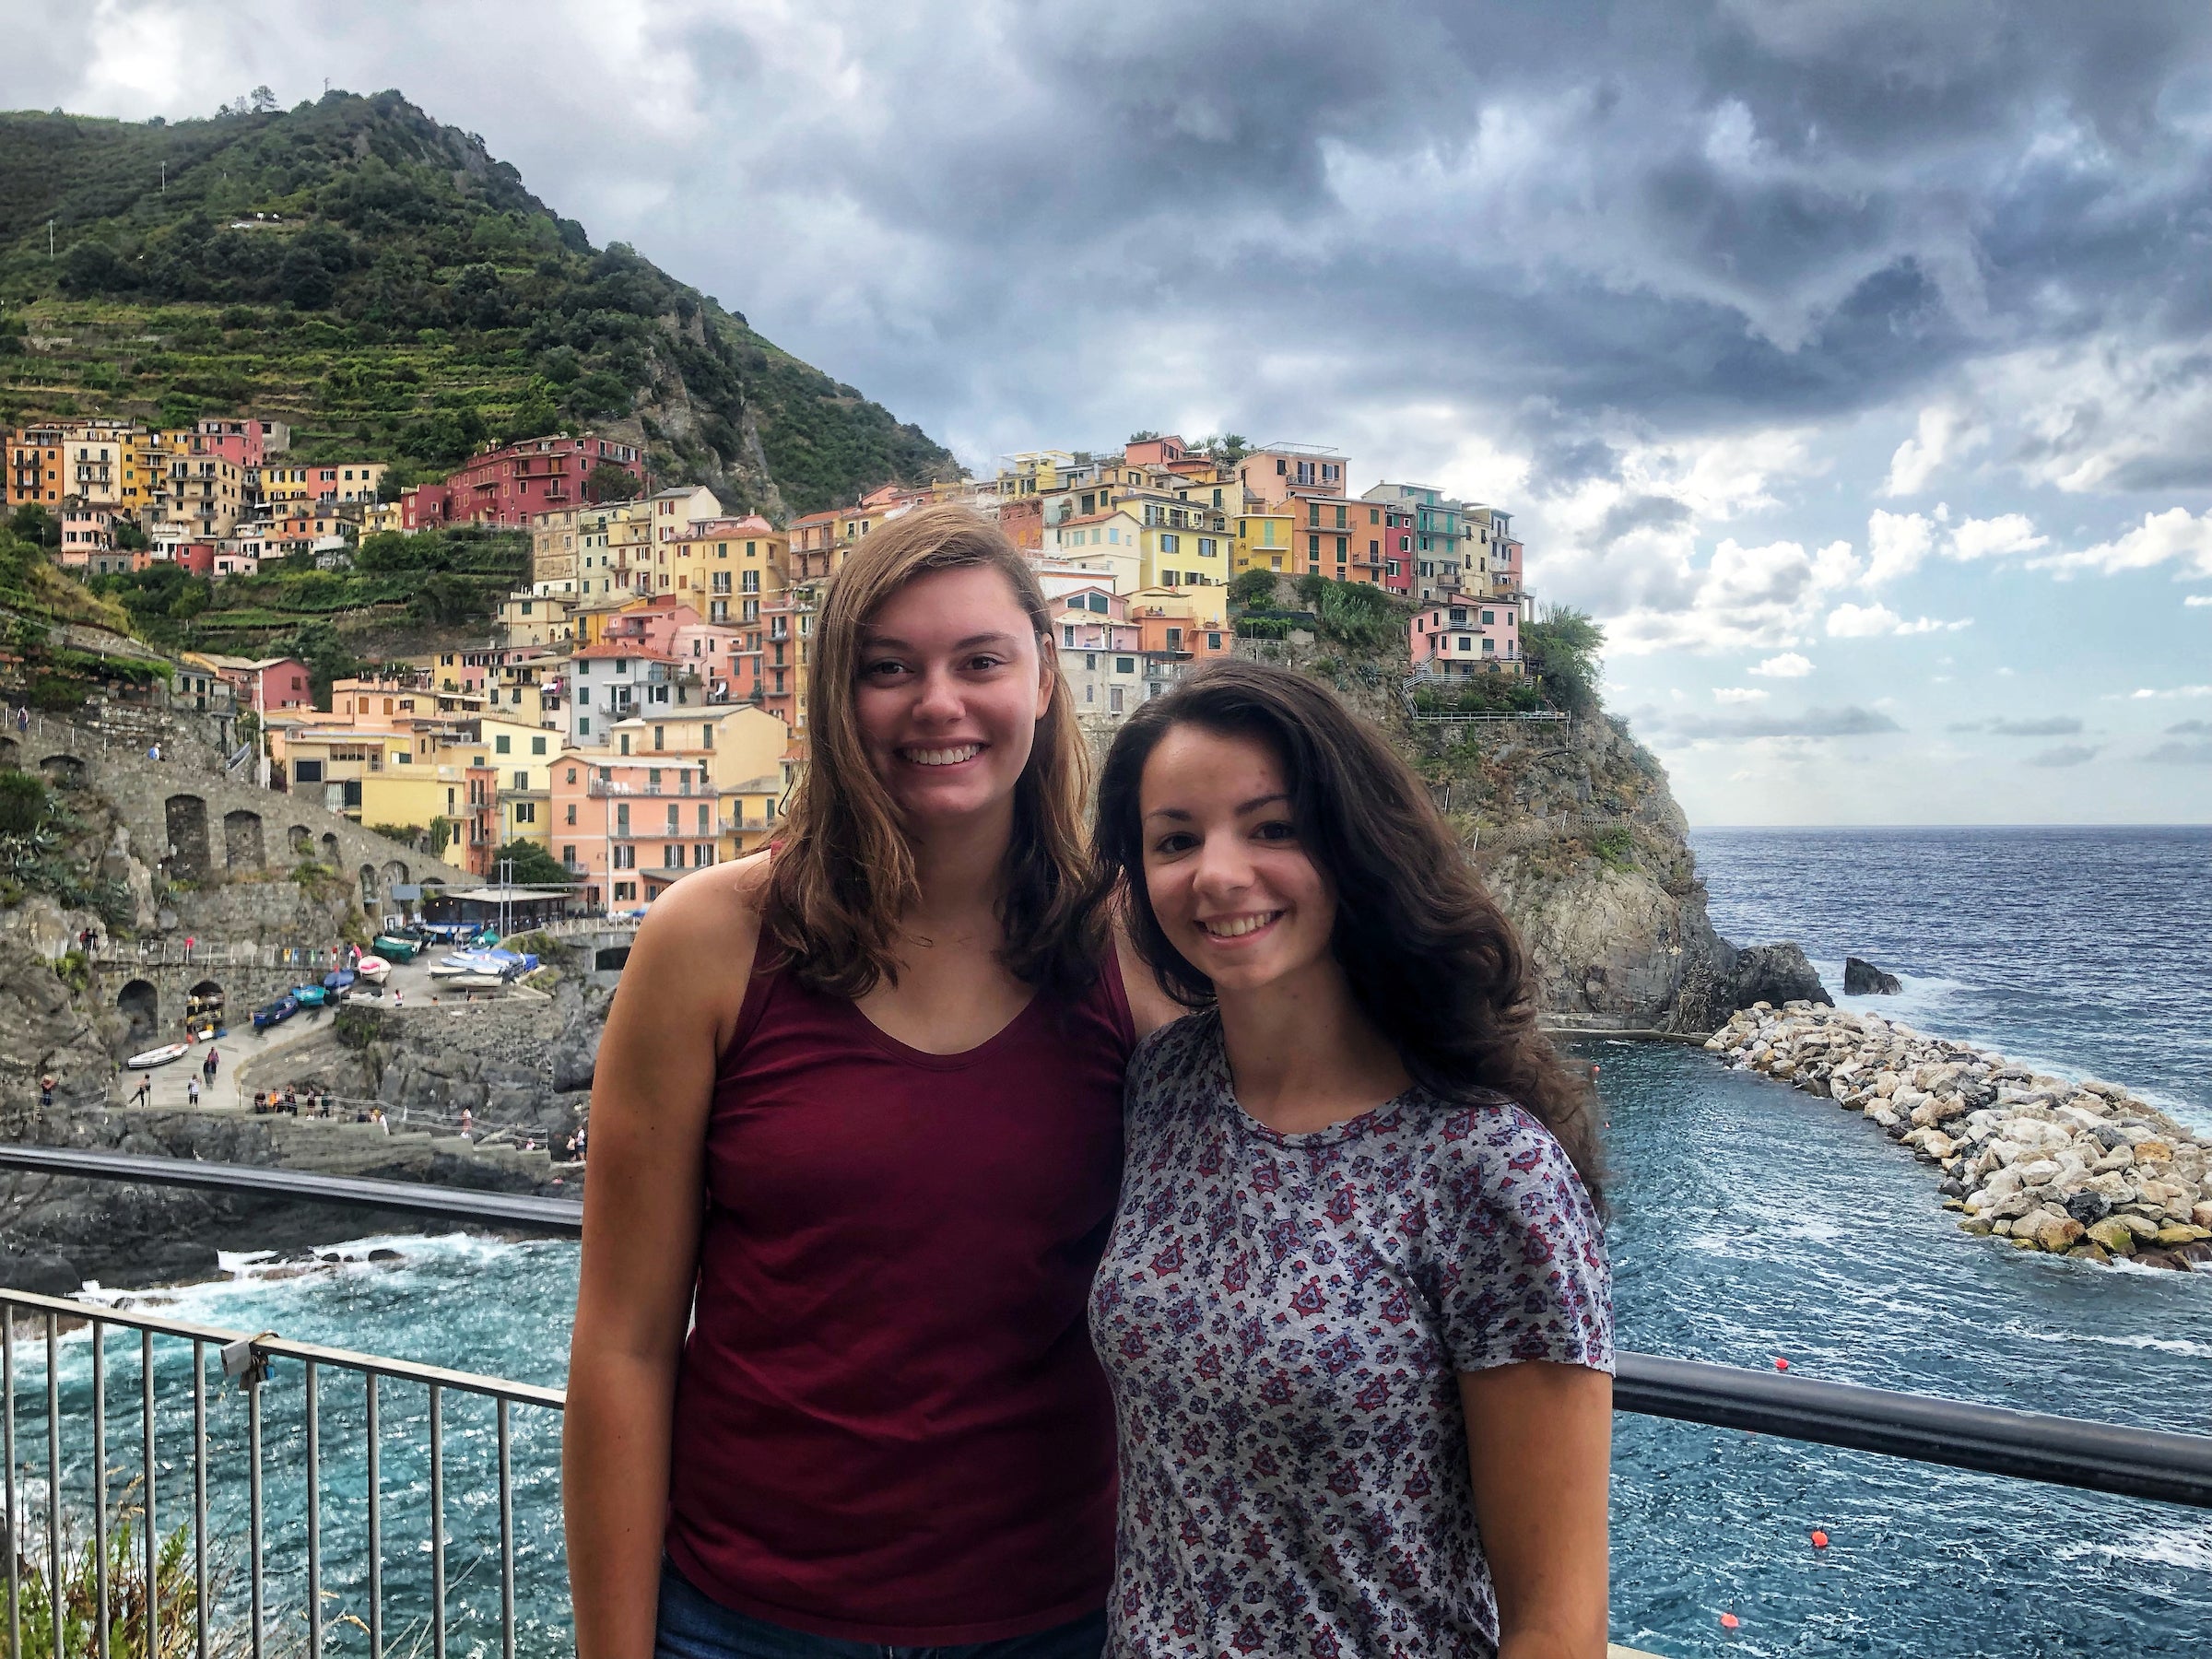 Nicole Flohr and Alyssa Lahoda visit Cinque Terre, Italy during Fall 2019 study abroad semester.